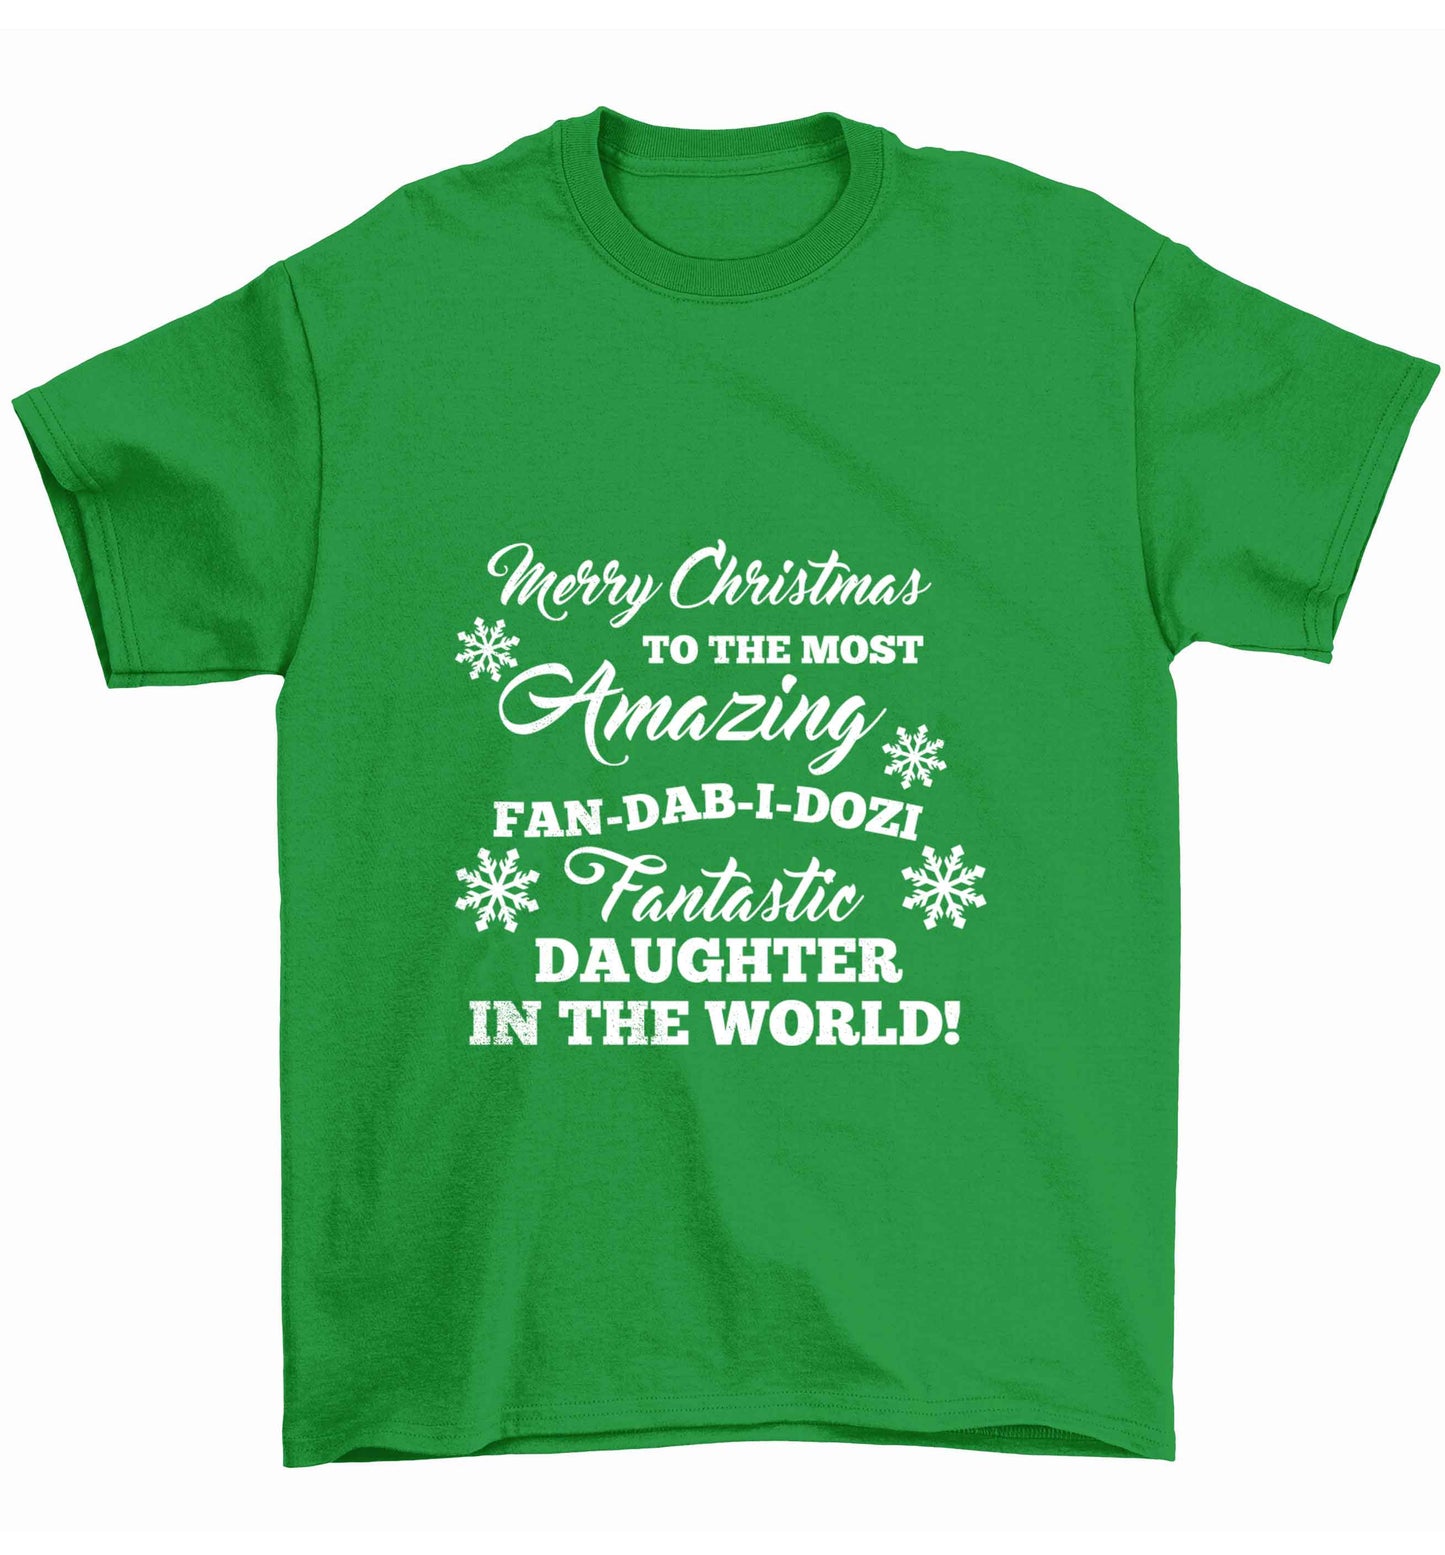 Merry Christmas to the most amazing fan-dab-i-dozi fantasic Daughter in the world Children's green Tshirt 12-13 Years